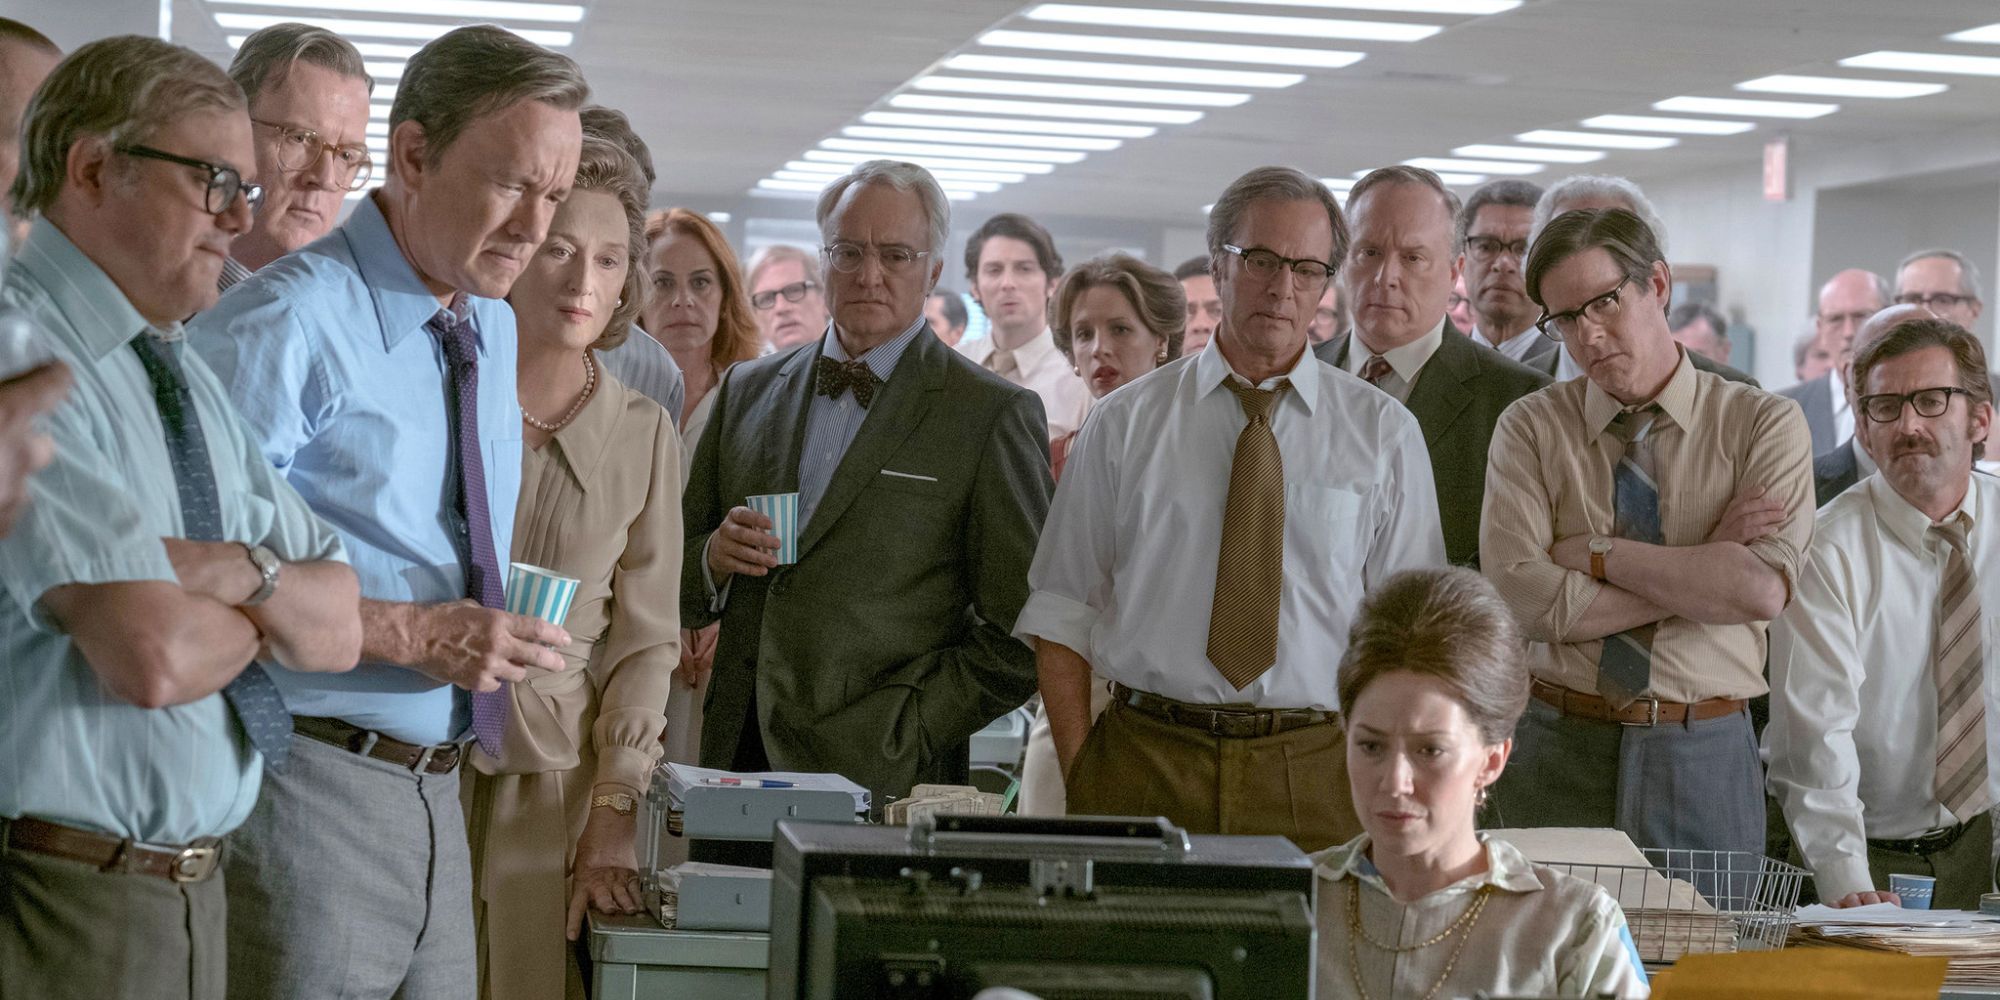 The cast of 2017's The Post